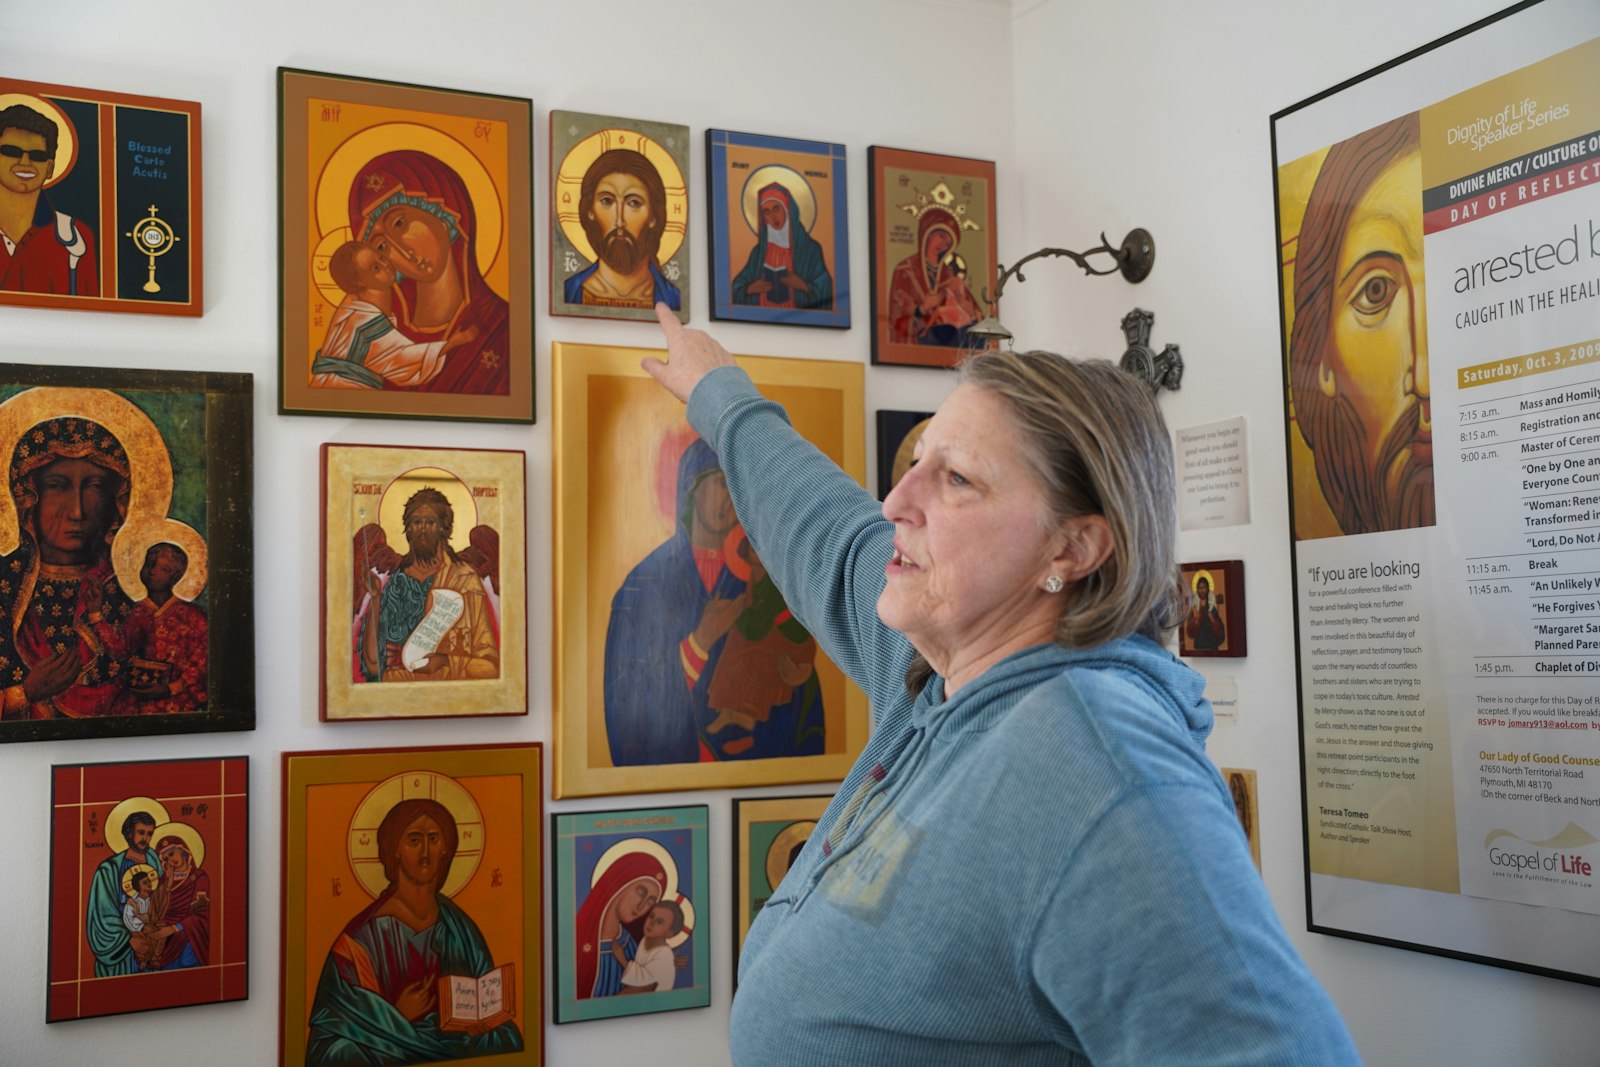 Crombie keeps replicants of all the icons that have been commissioned by others in her home studio. Whenever someone commissions an icon, she prays about whether or not God wills her to write the icon.